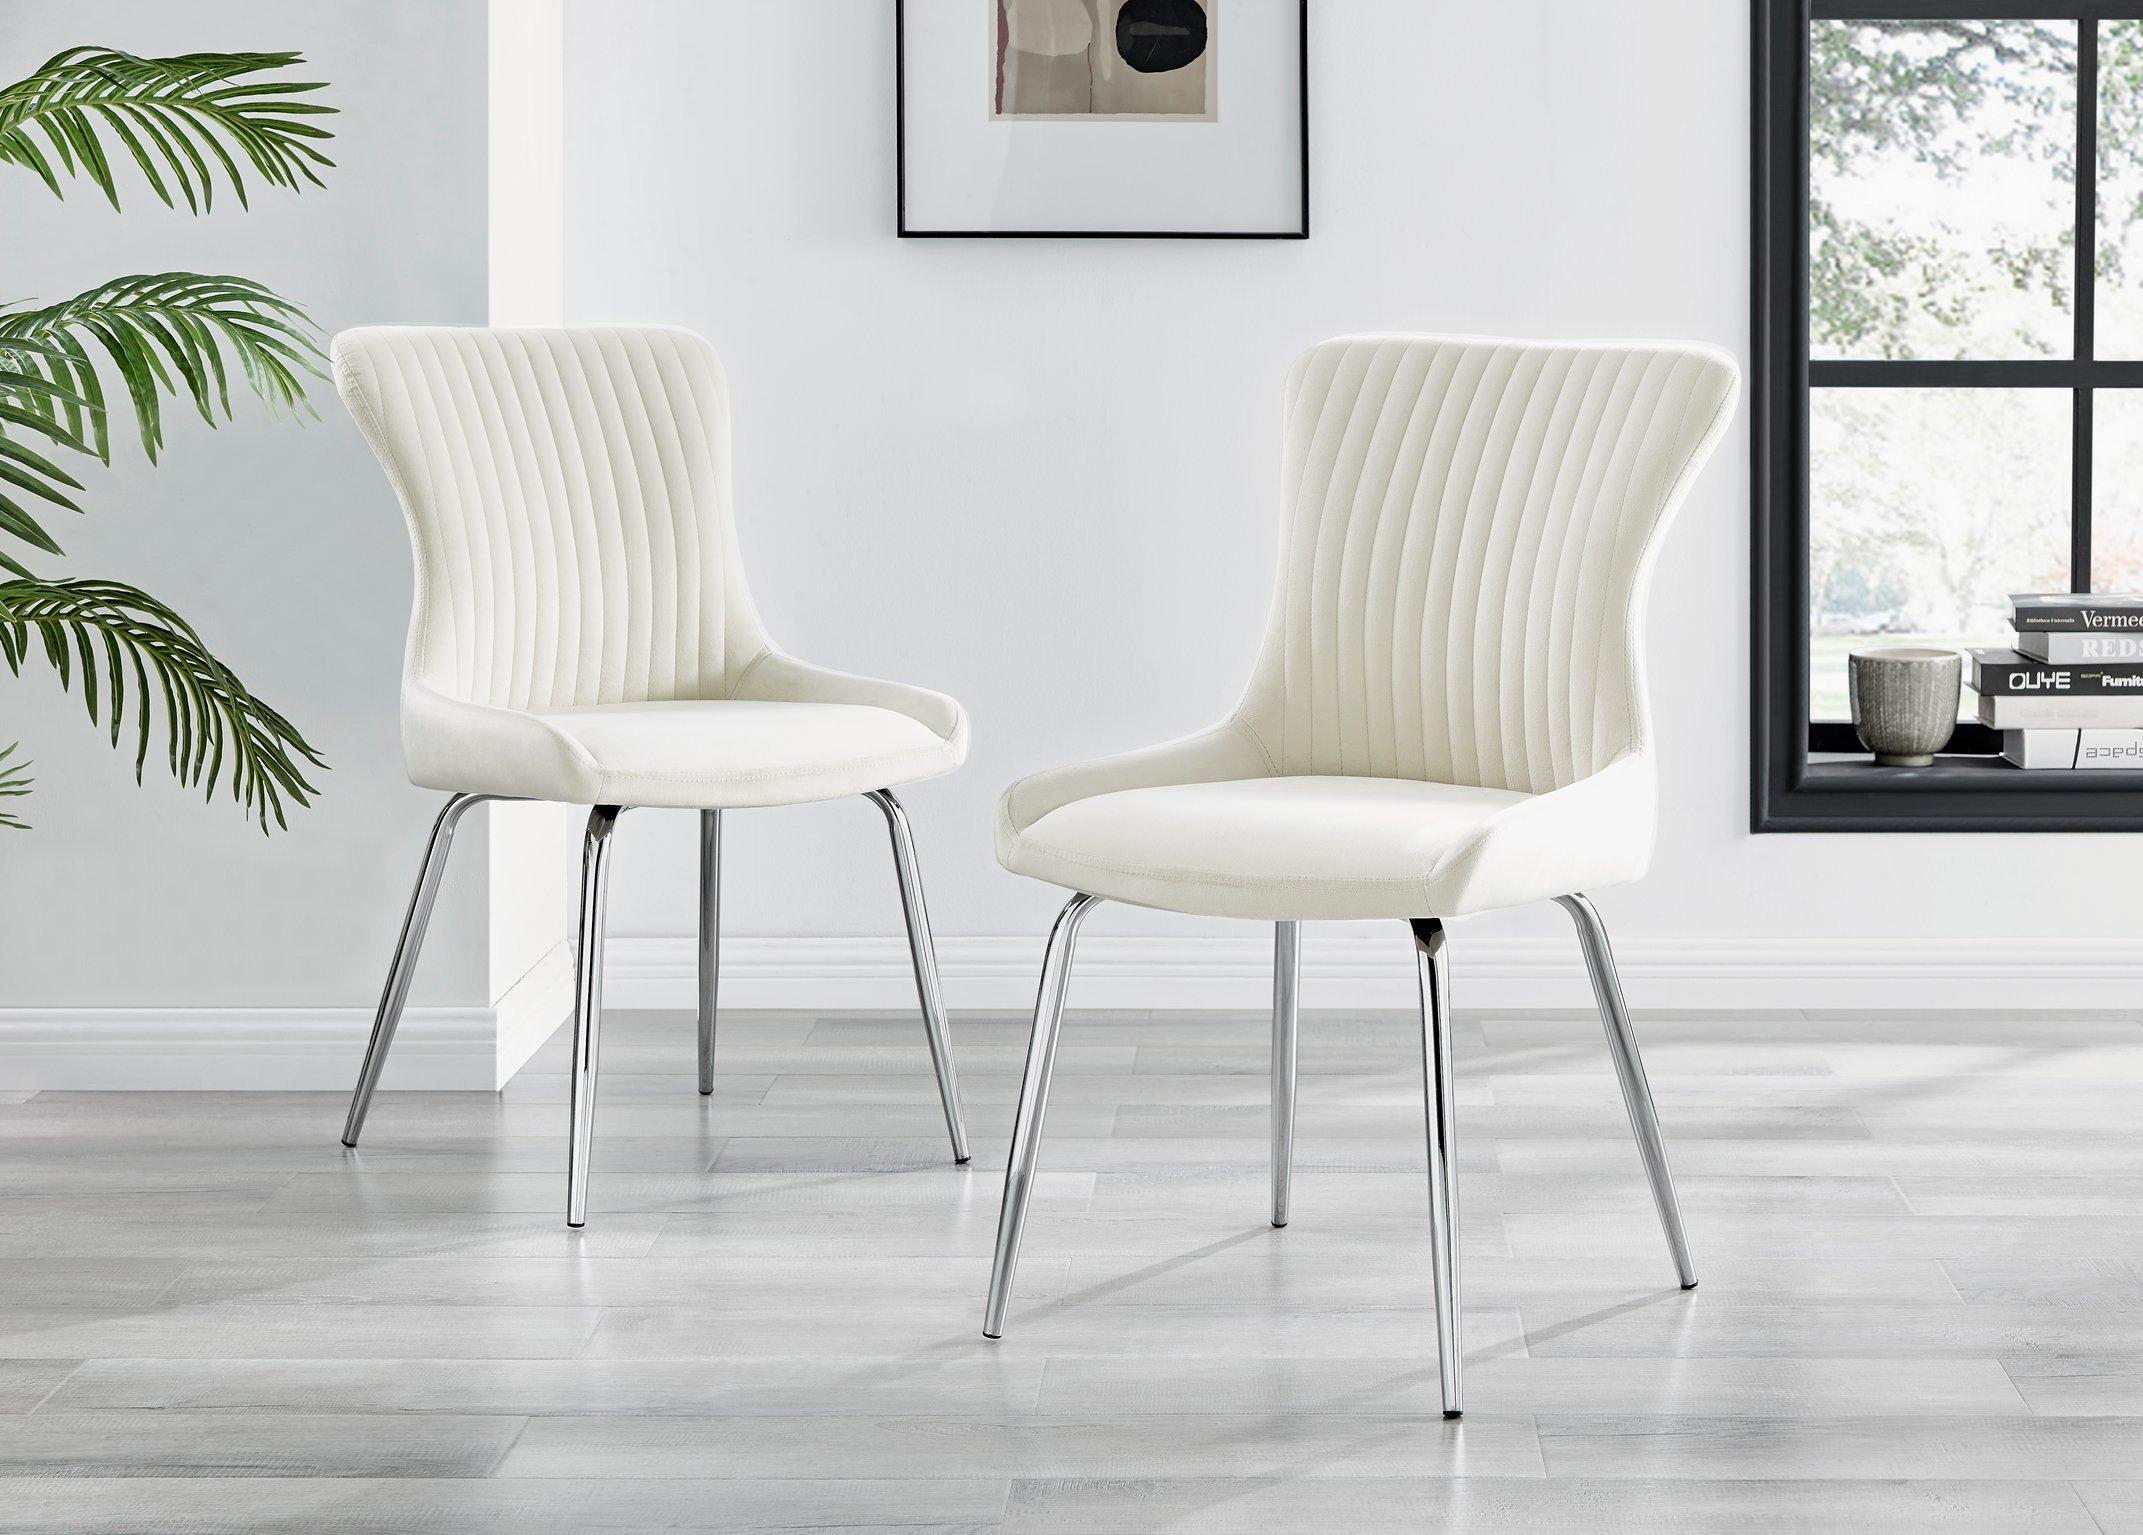 Set of 2 Nora Deep Padded Luxurious Dining Chairs Upholstered In Soft Velvet With Chrome Legs